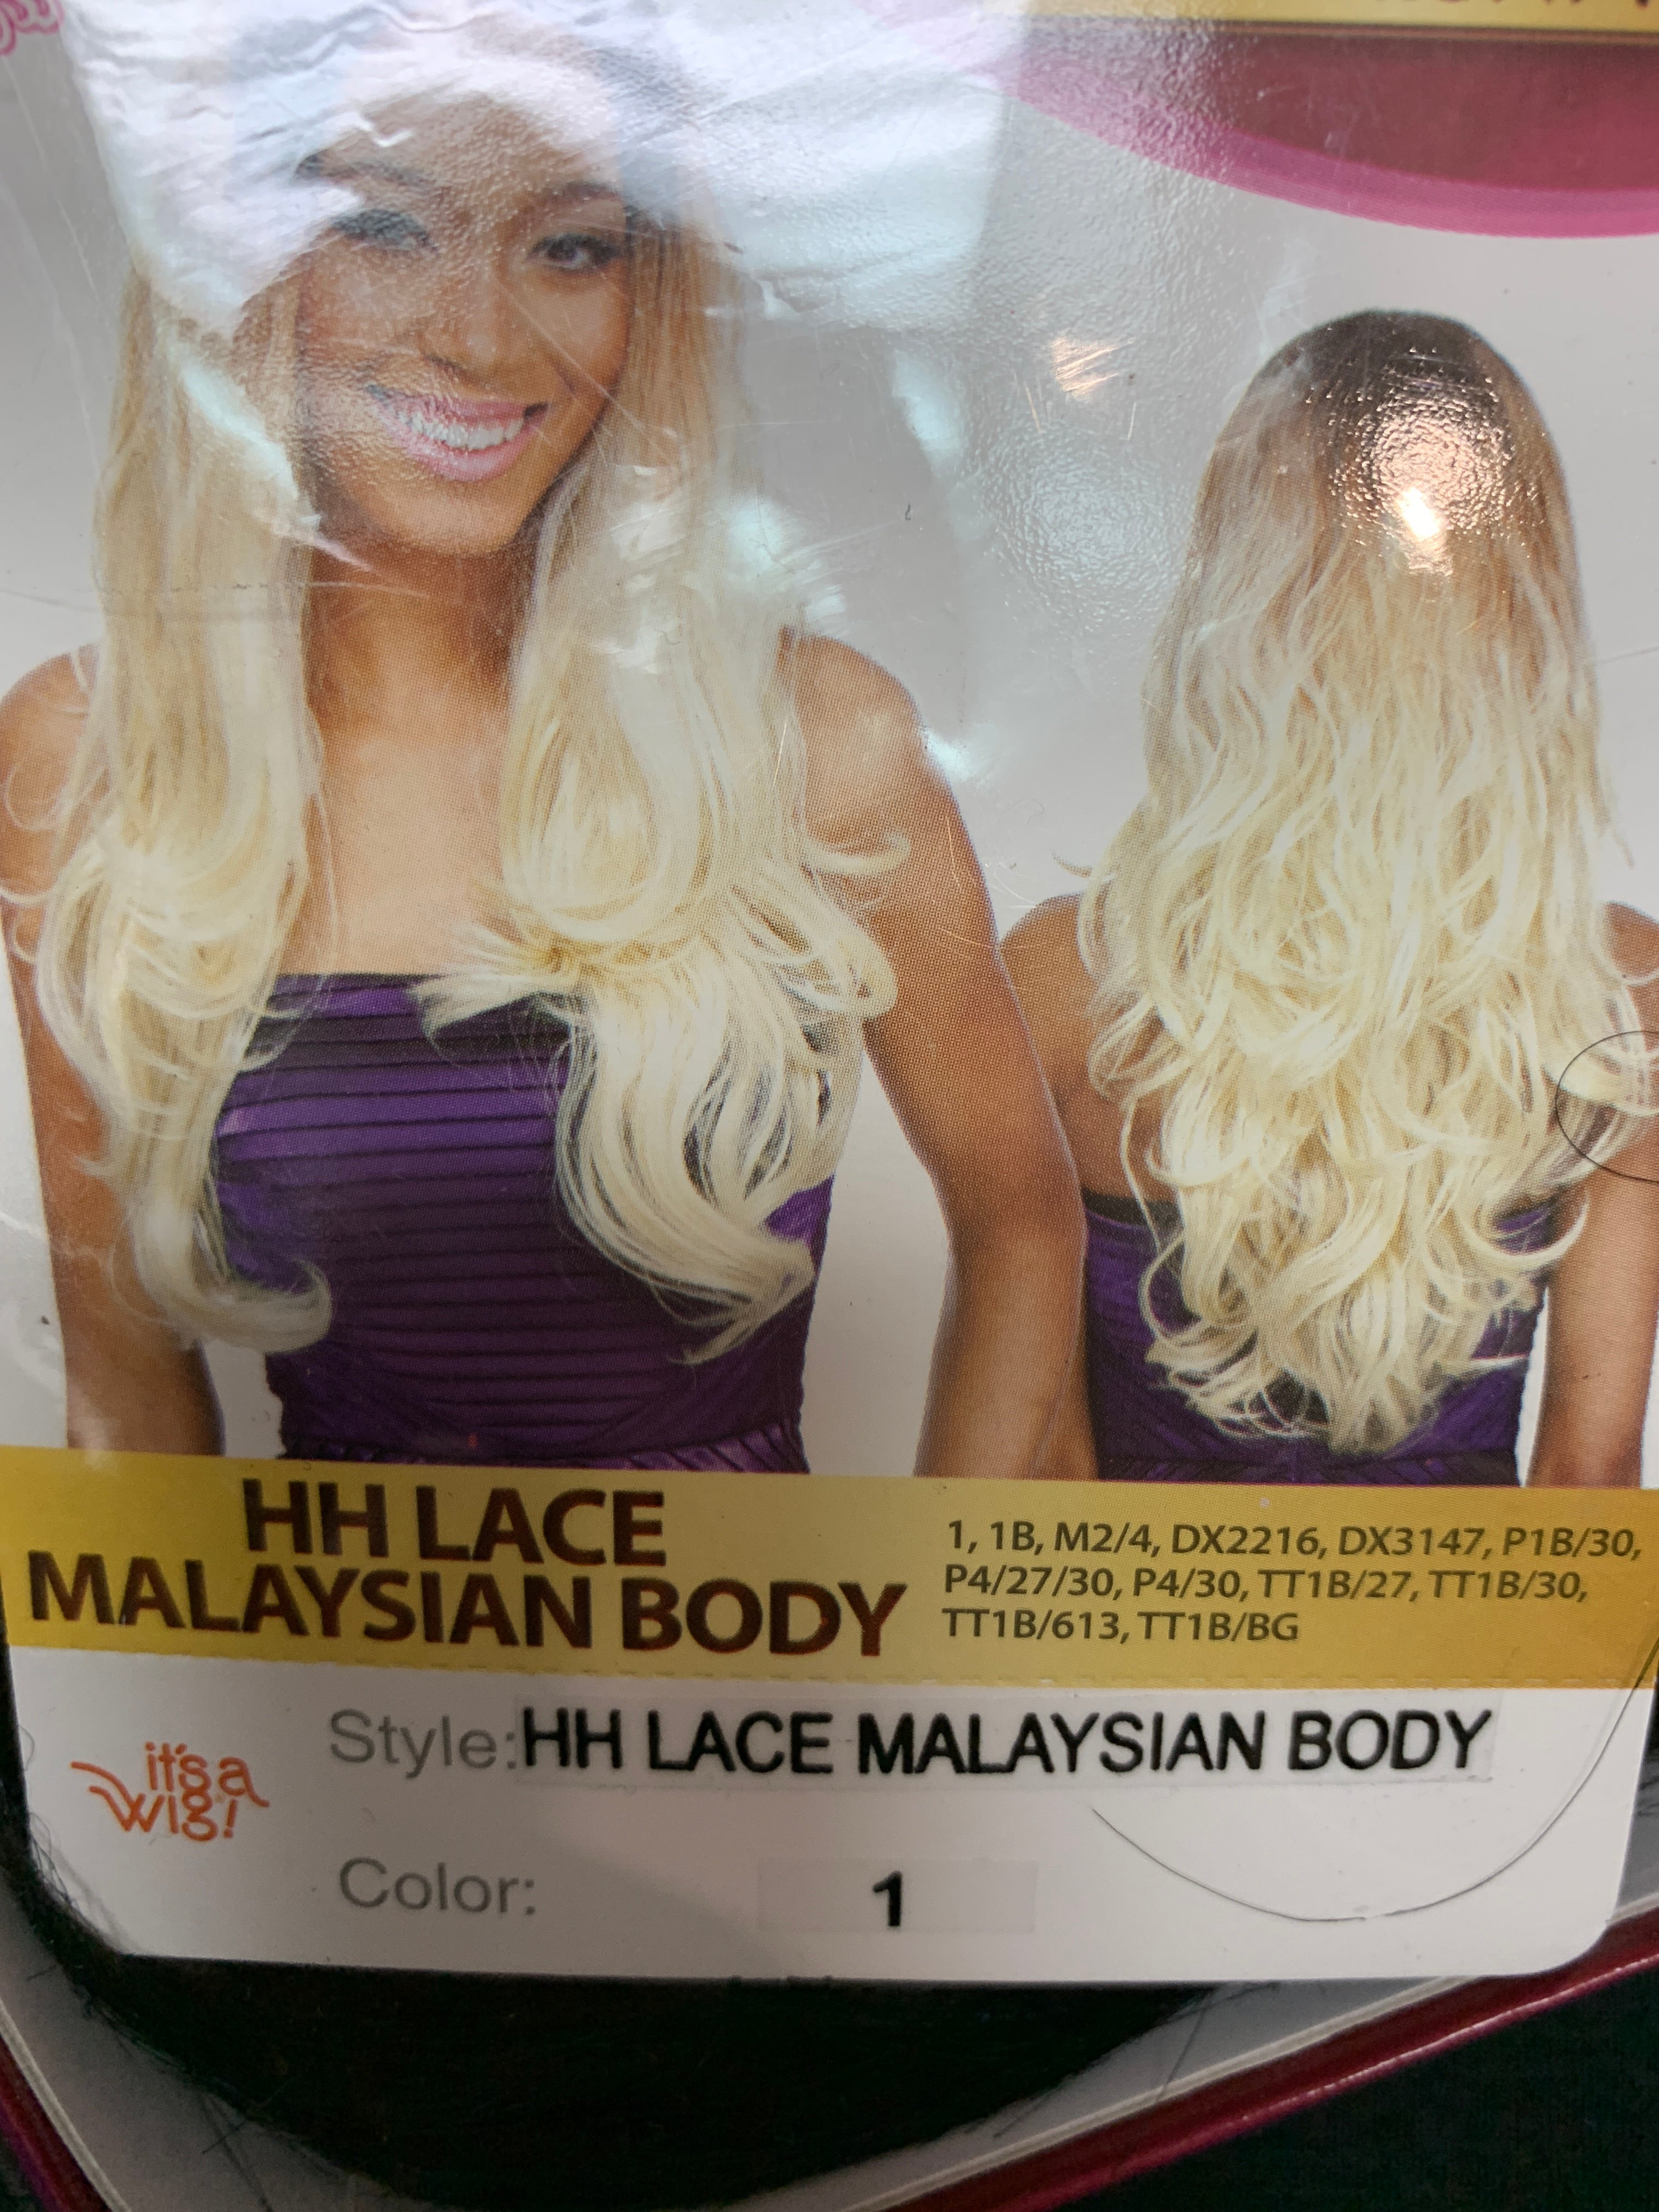 It’s a wig hh lace malaysian body